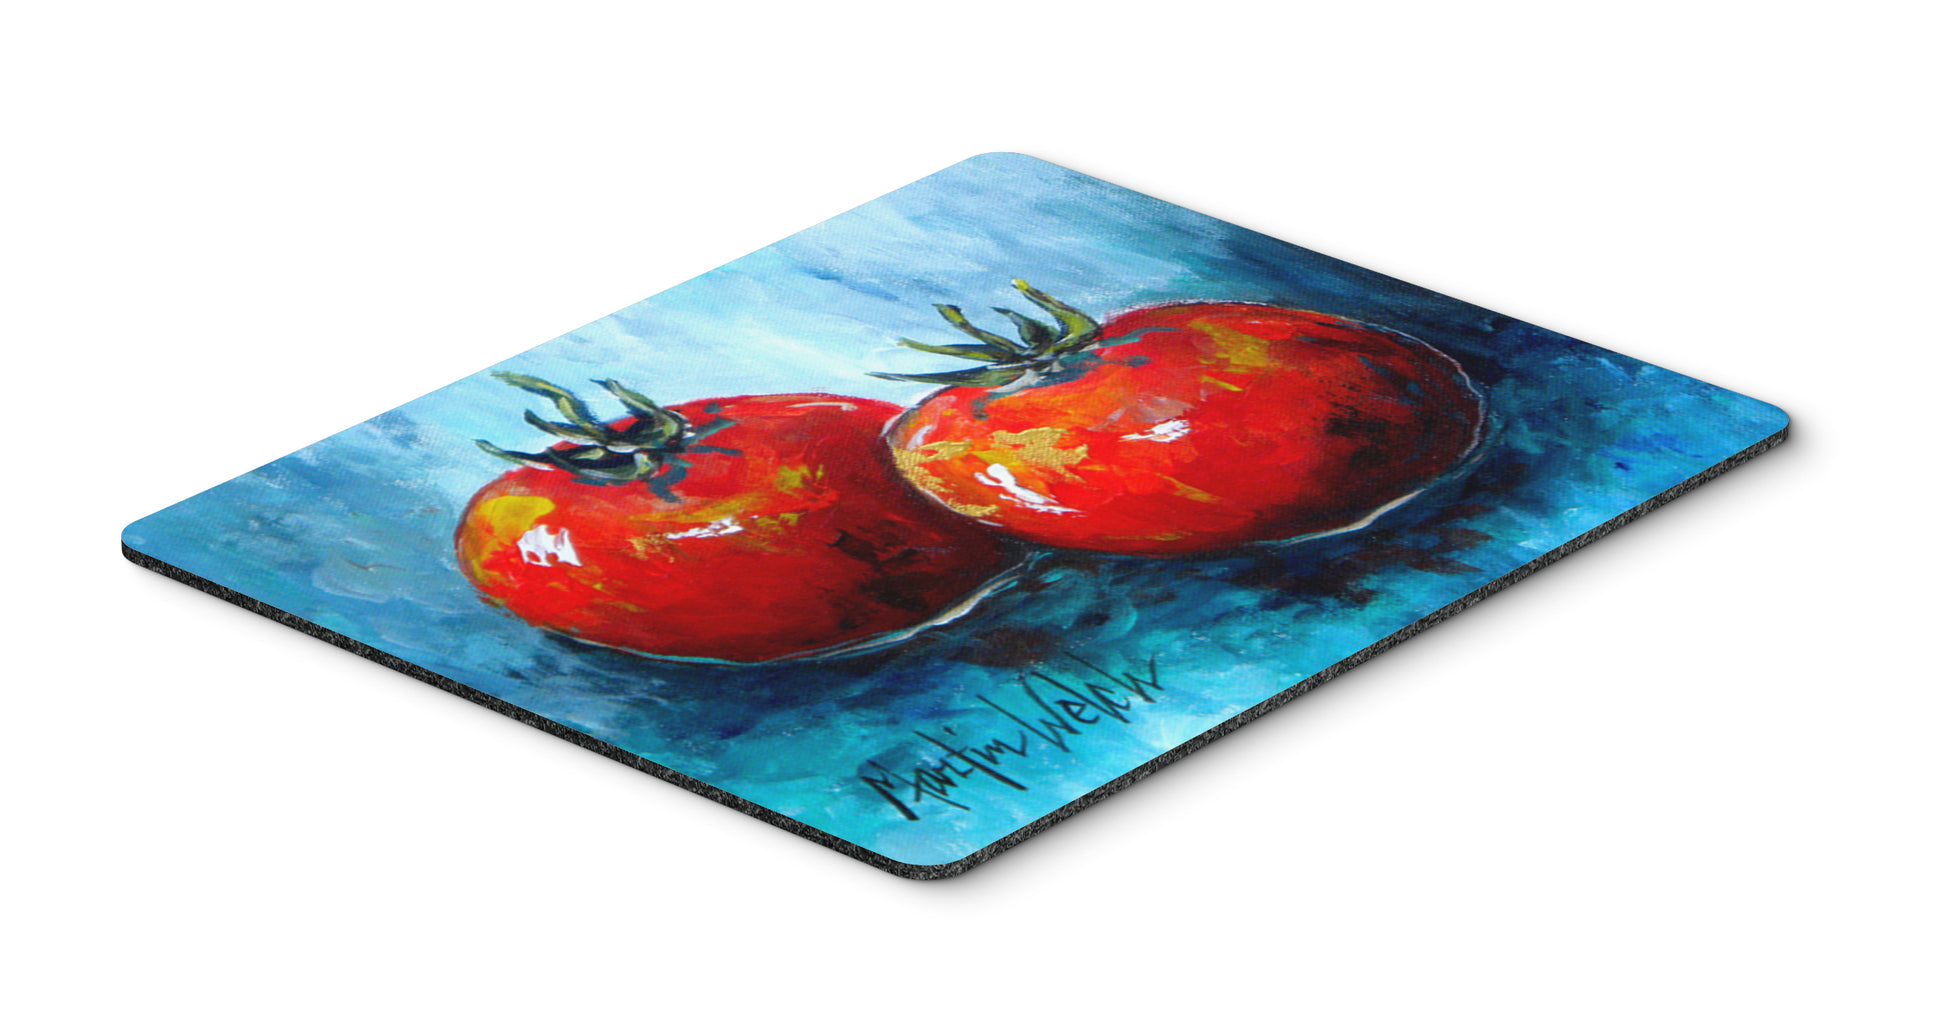 Buy this Vegetables - Tomatoes Red Toes Mouse Pad, Hot Pad or Trivet